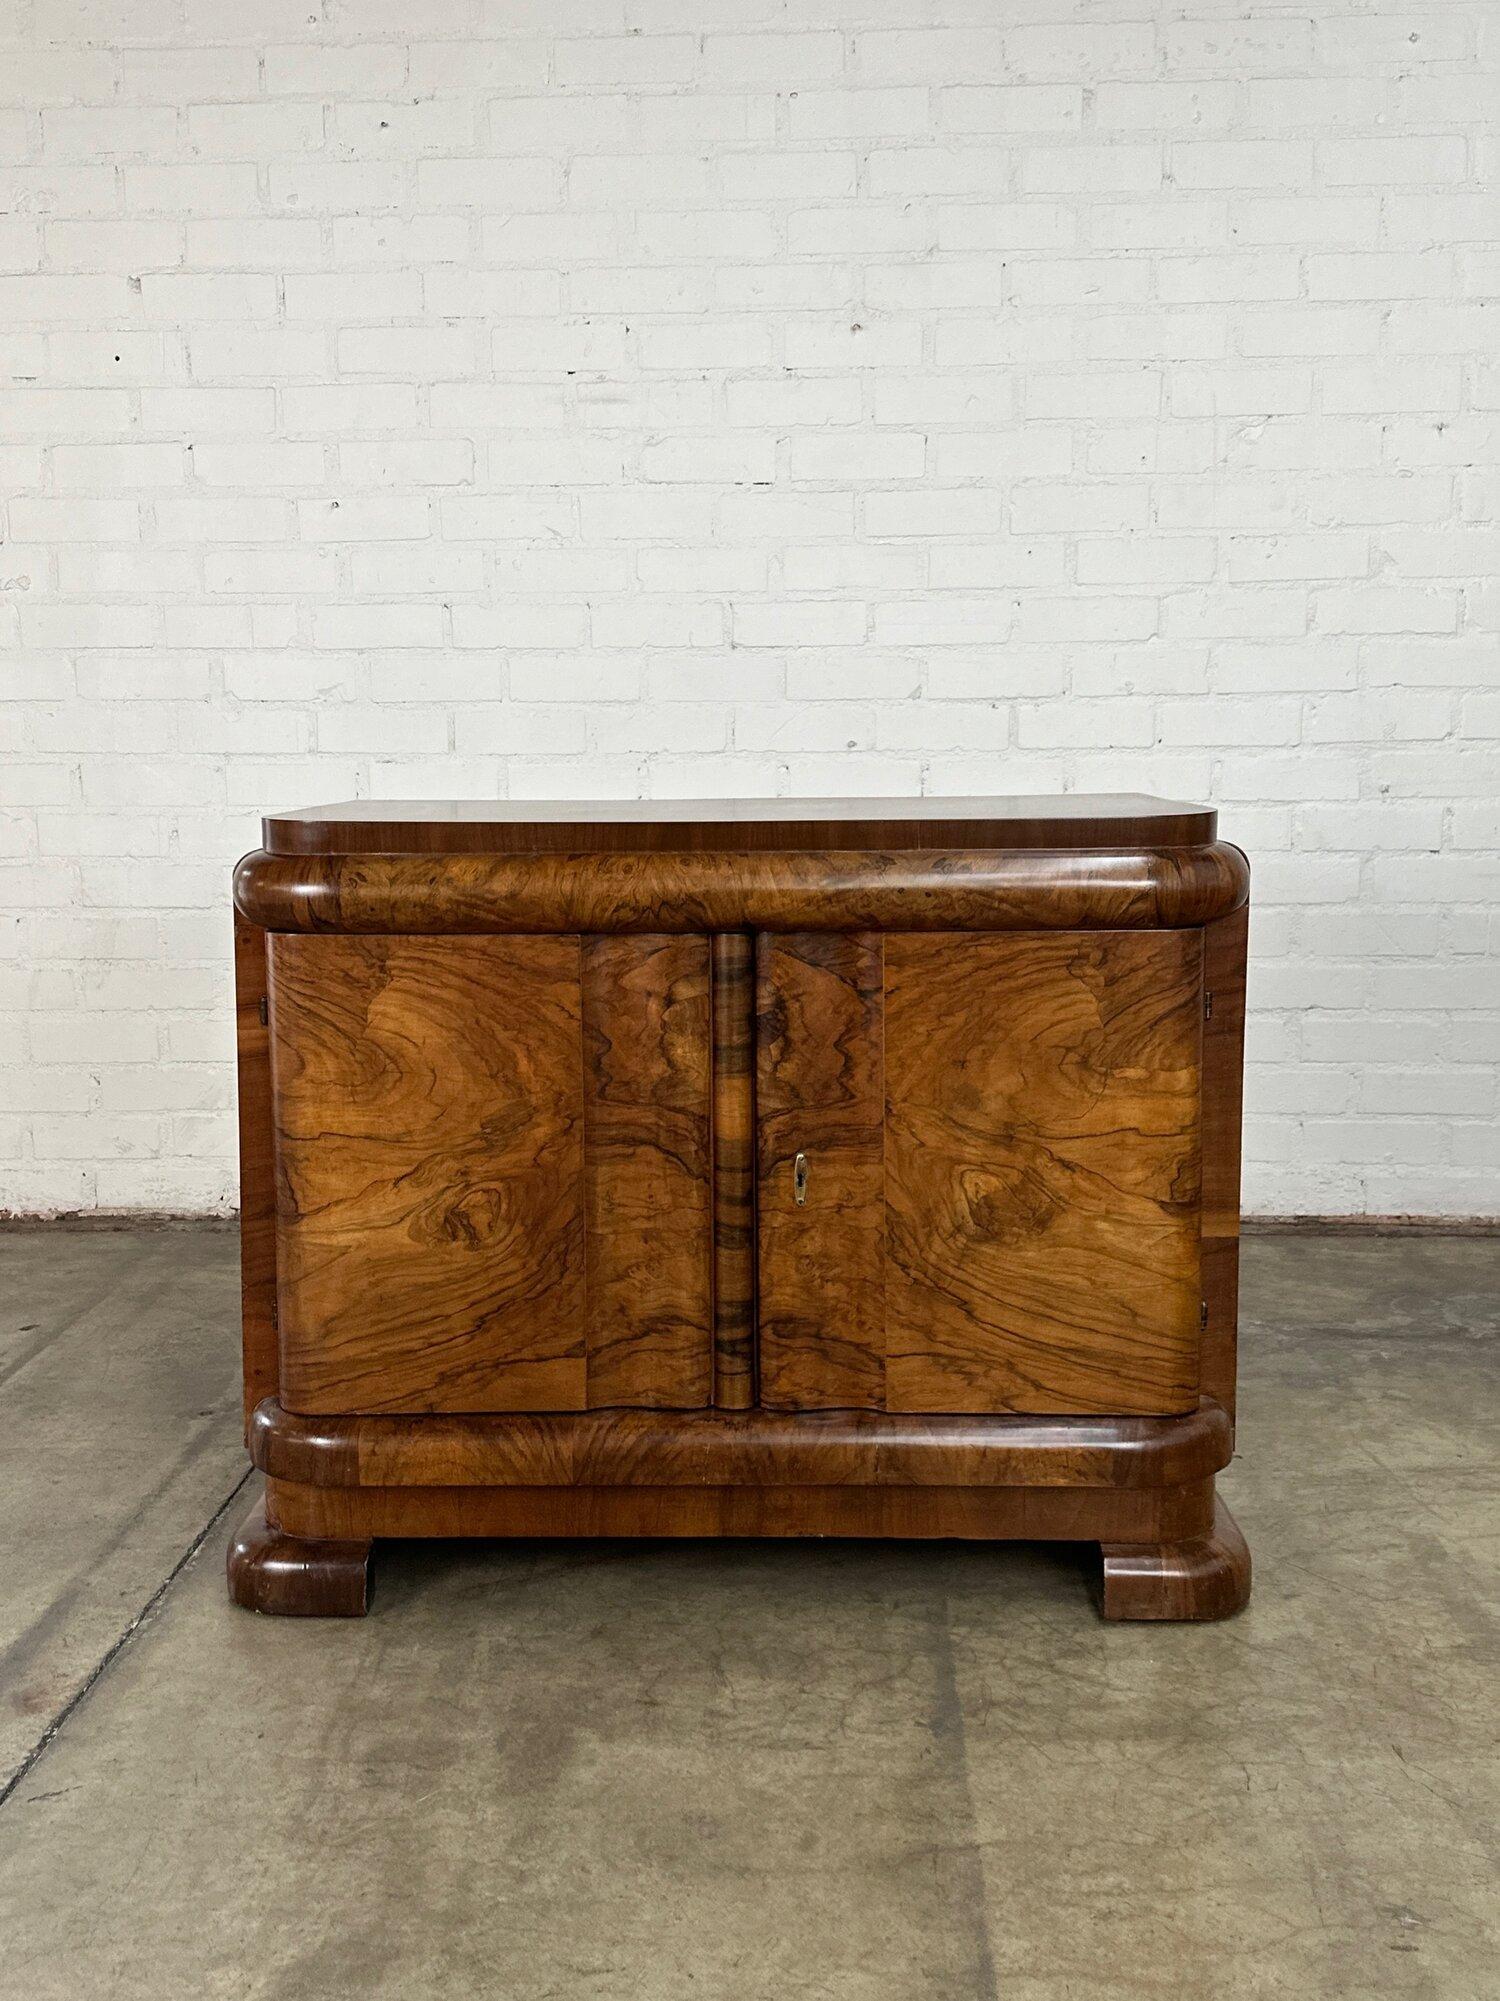 W45 D22 H35.5

Fully restored flamed walnut burl wood credenza in great condition. Item has been strucutrally reinfroced on interrior and exterior, credenza is now strong and sturdy. Item has been fully refinshed and shows well with no major areas